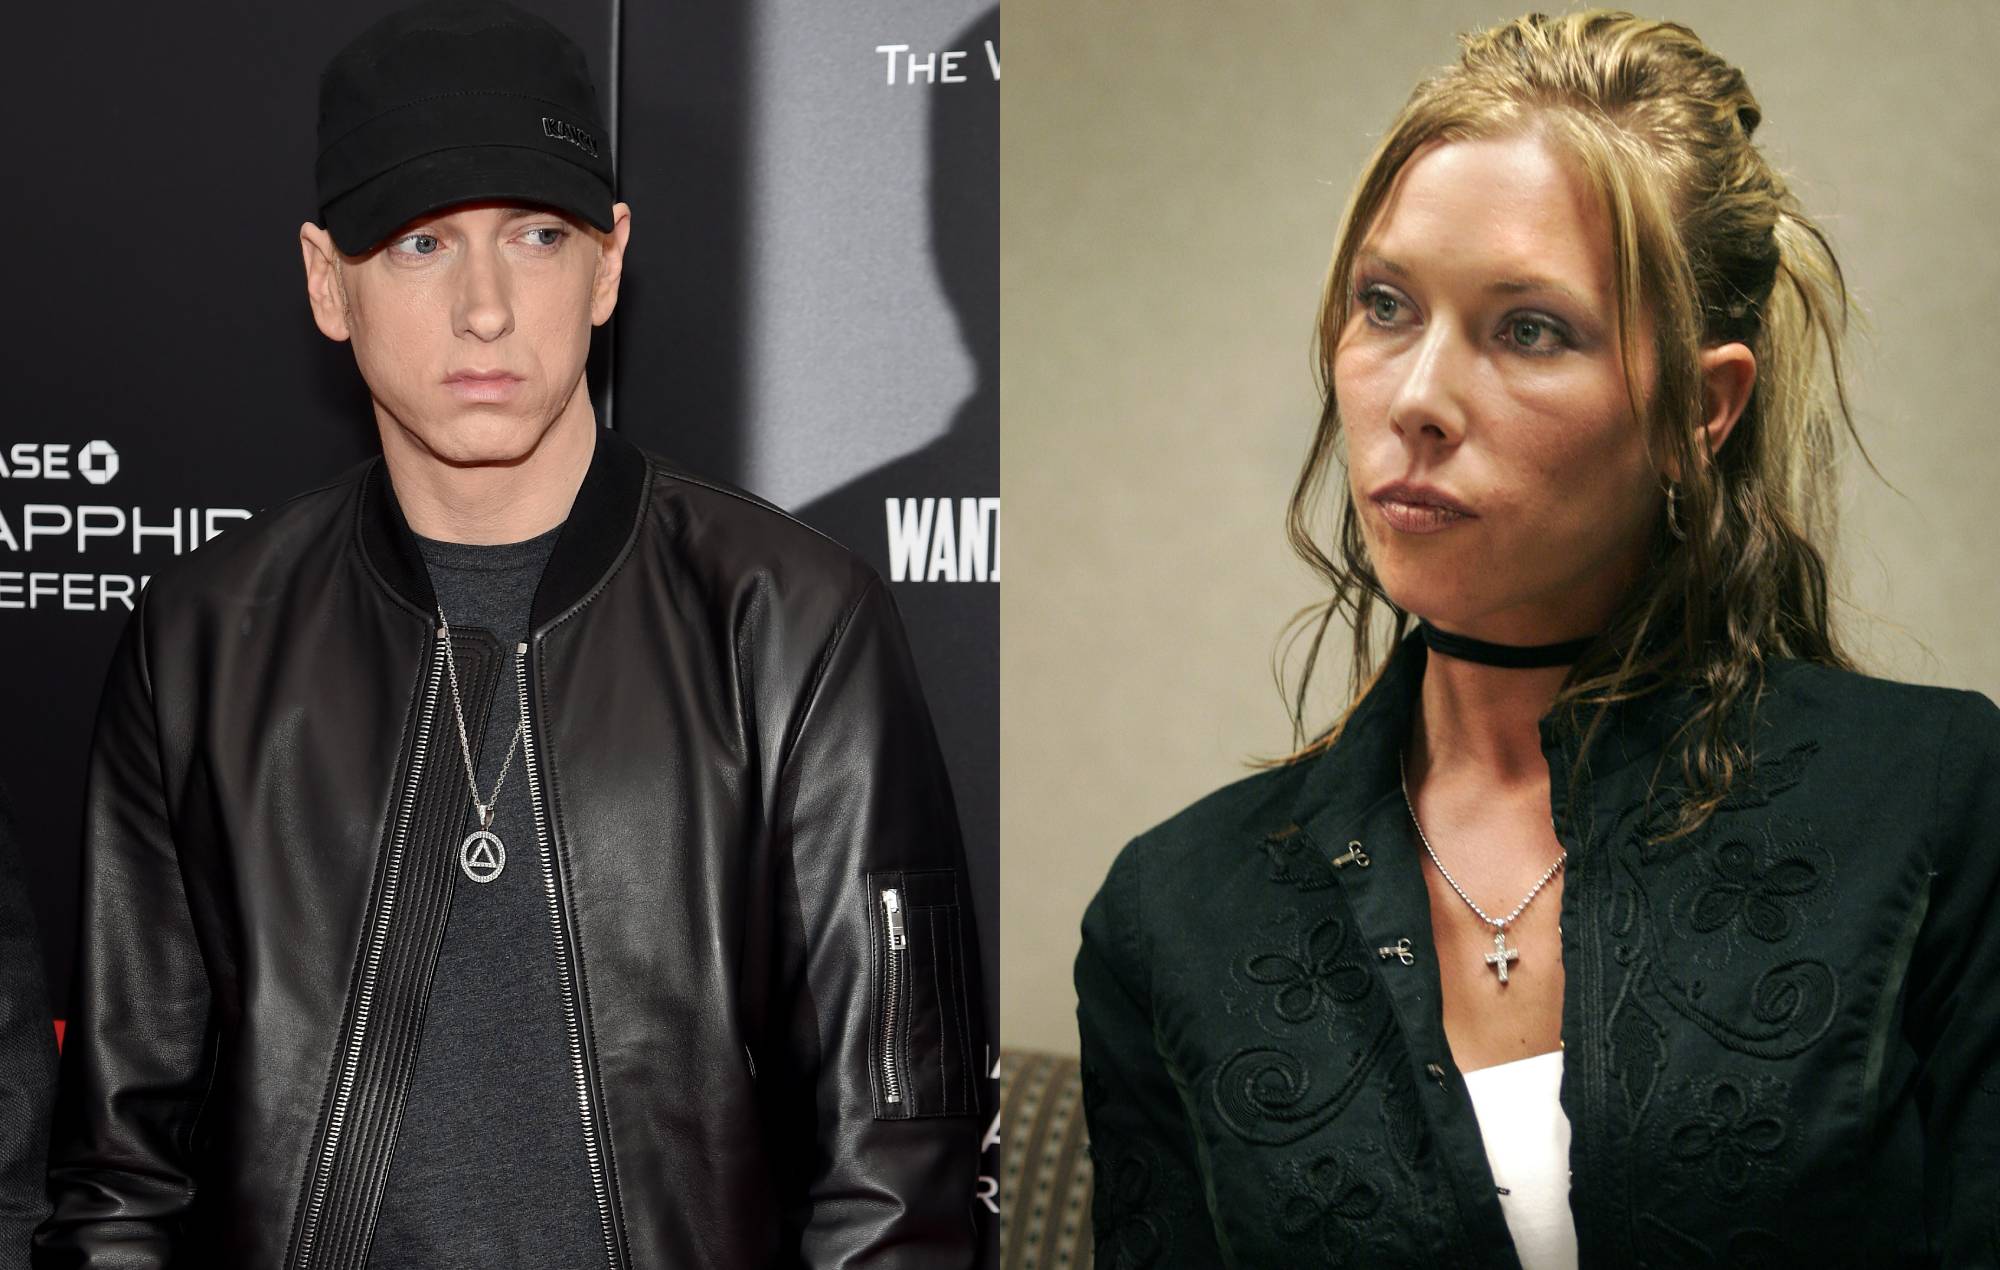 Discover The Latest Update On Who Eminem Is Dating - All You Need To Know!